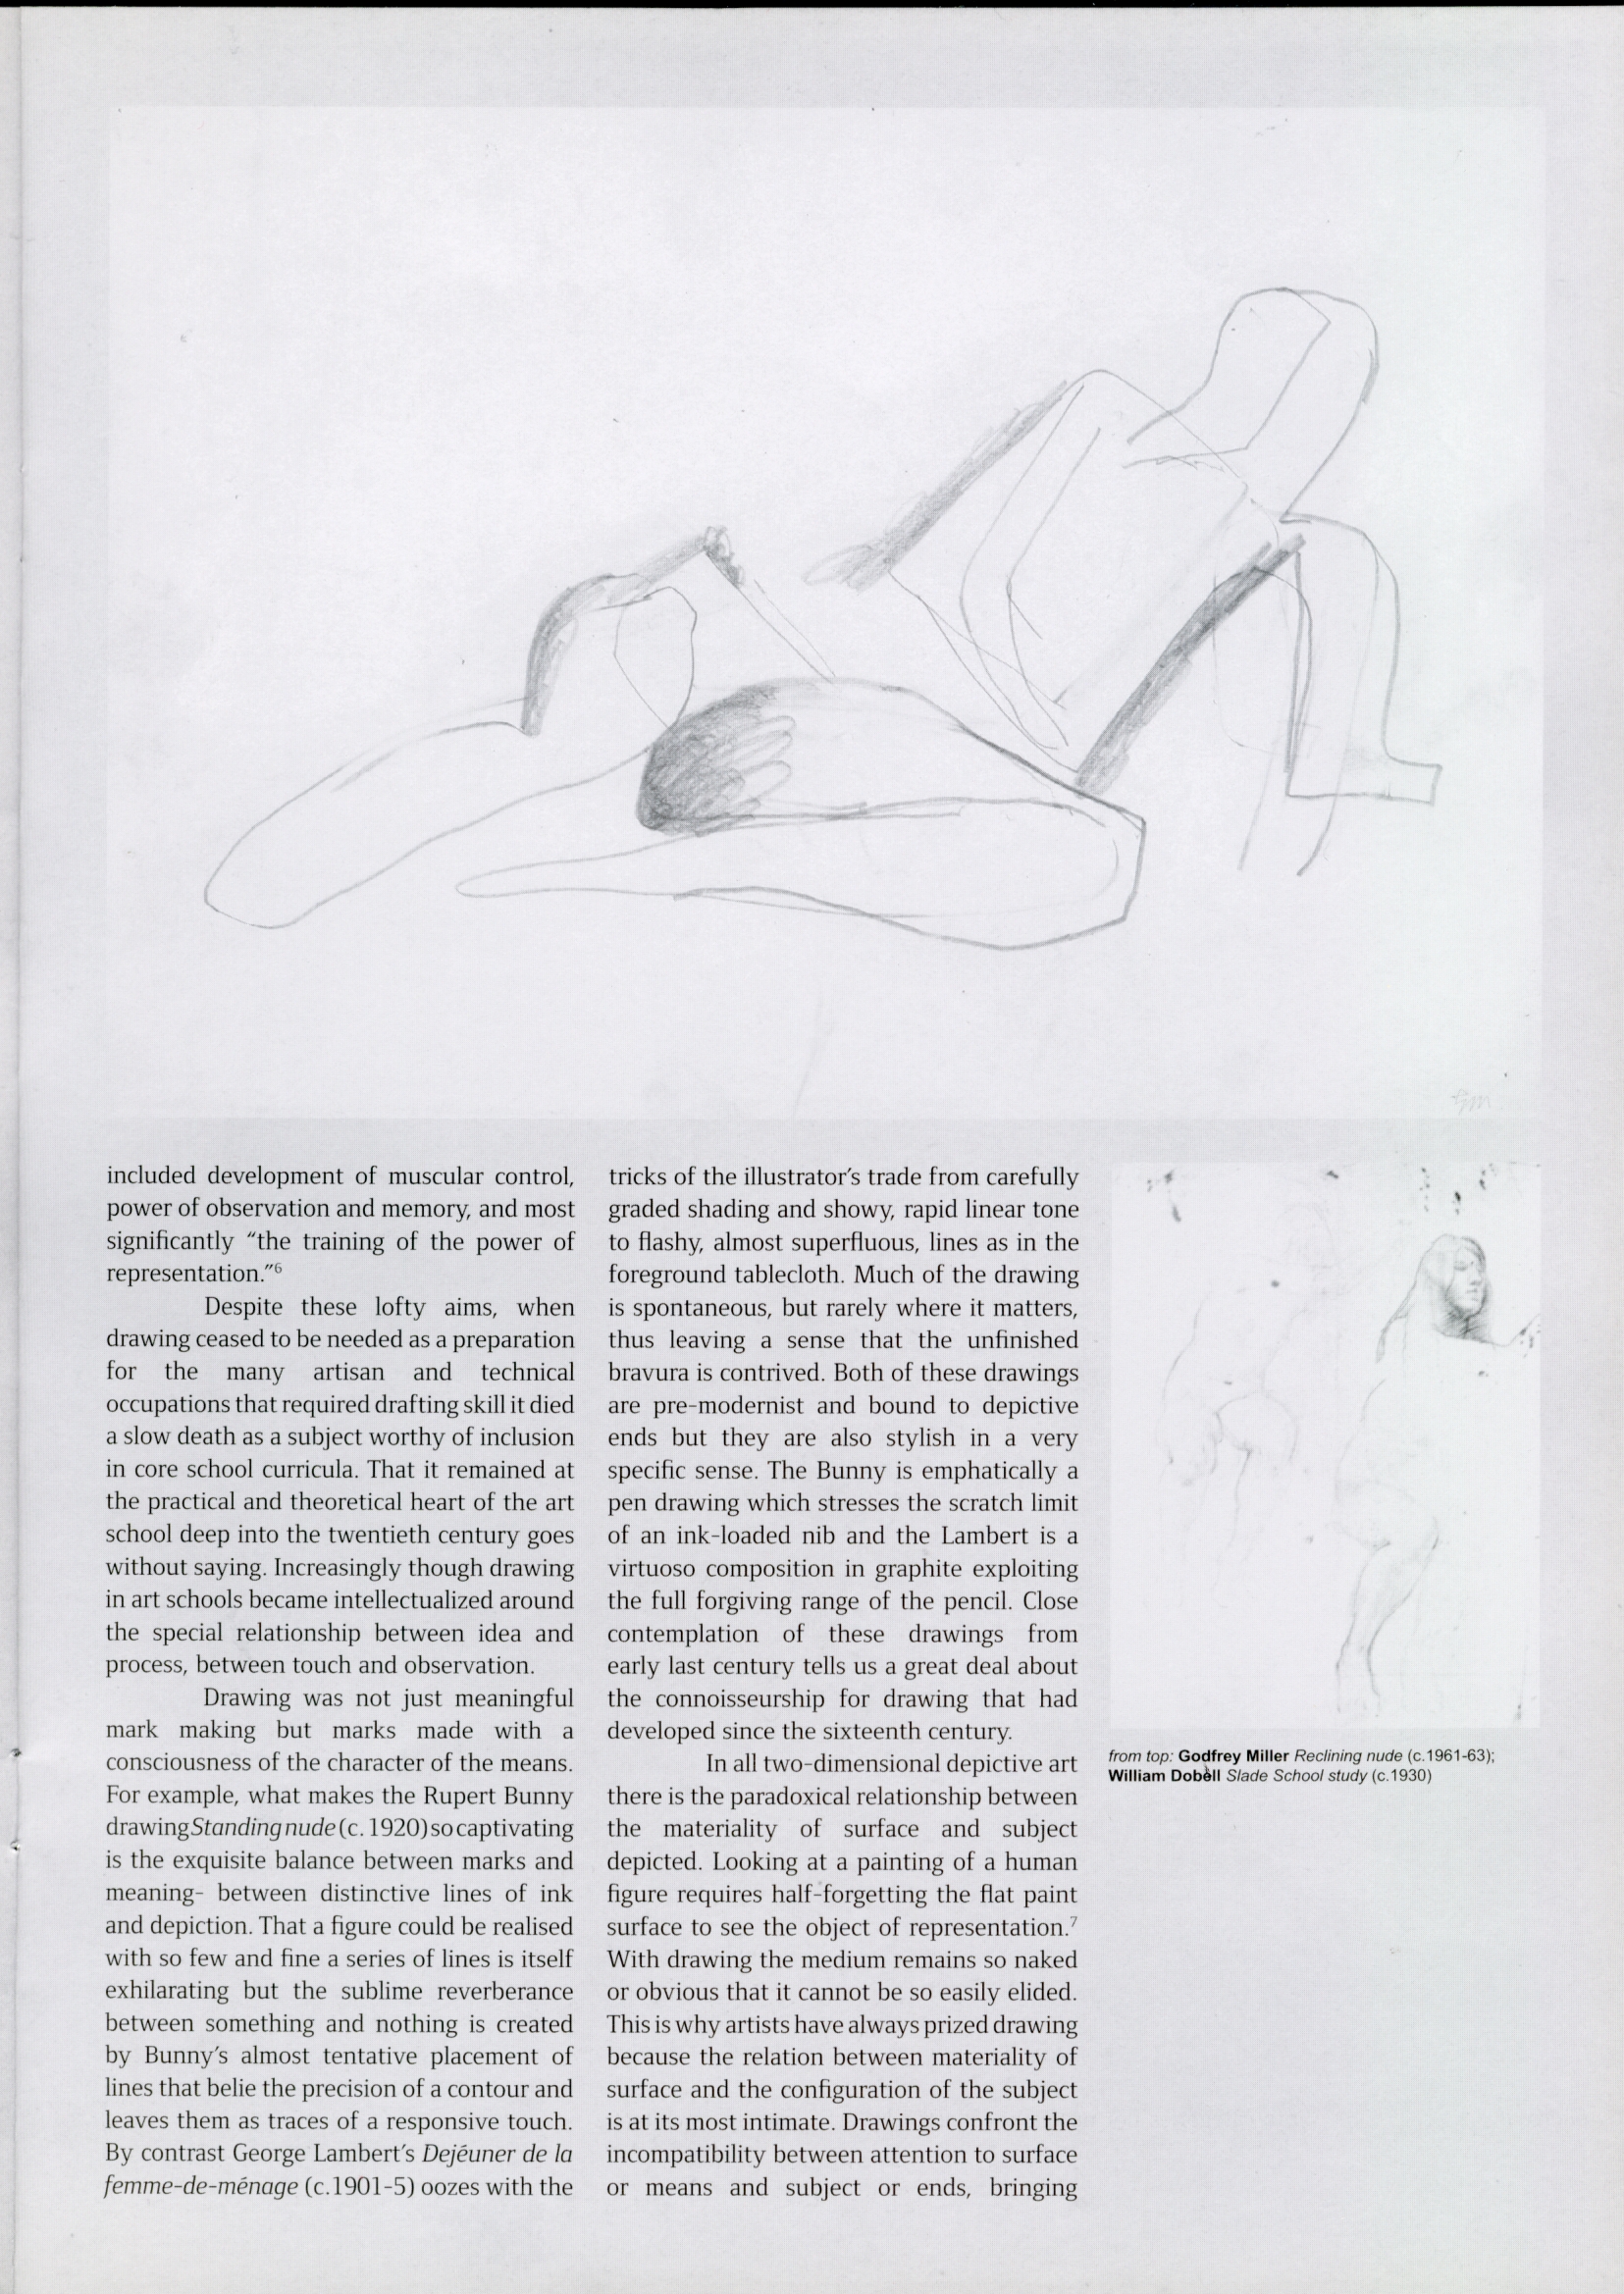 DrawingCentre-essay (1)_Page_3.jpg